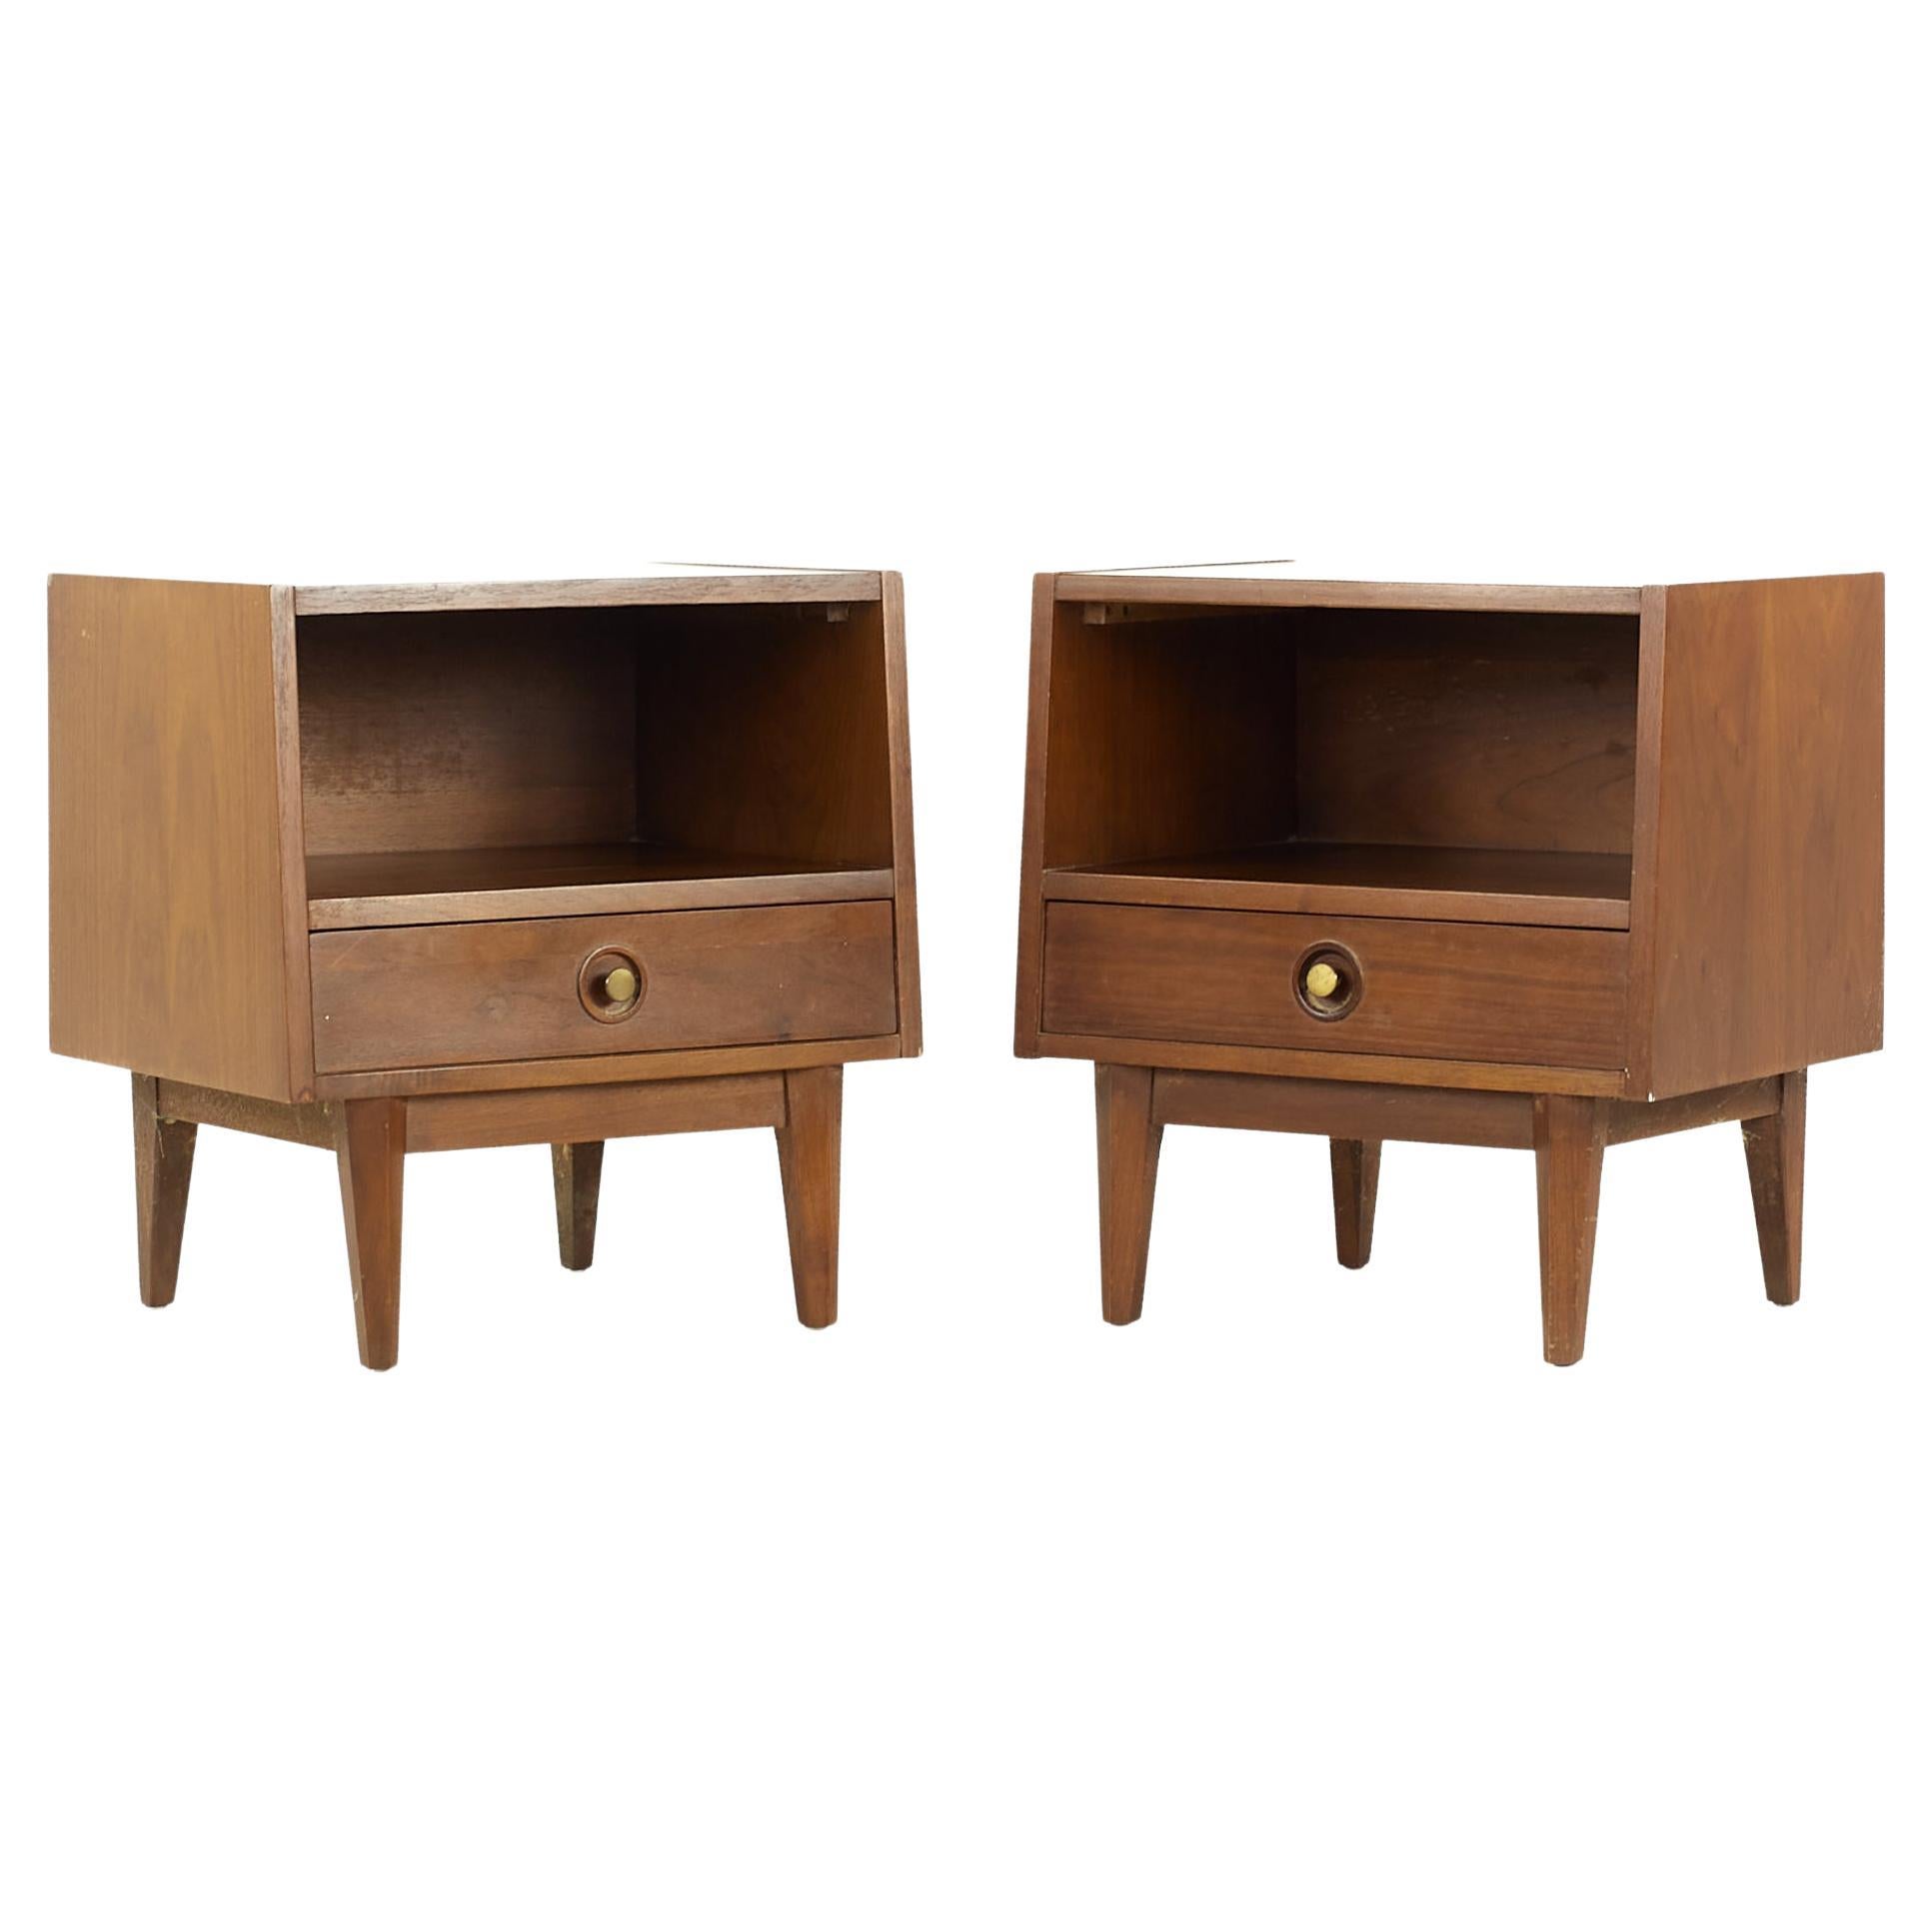 Albert Parvin American of Martinsville MCM Walnut and Brass Nightstands, Pair For Sale